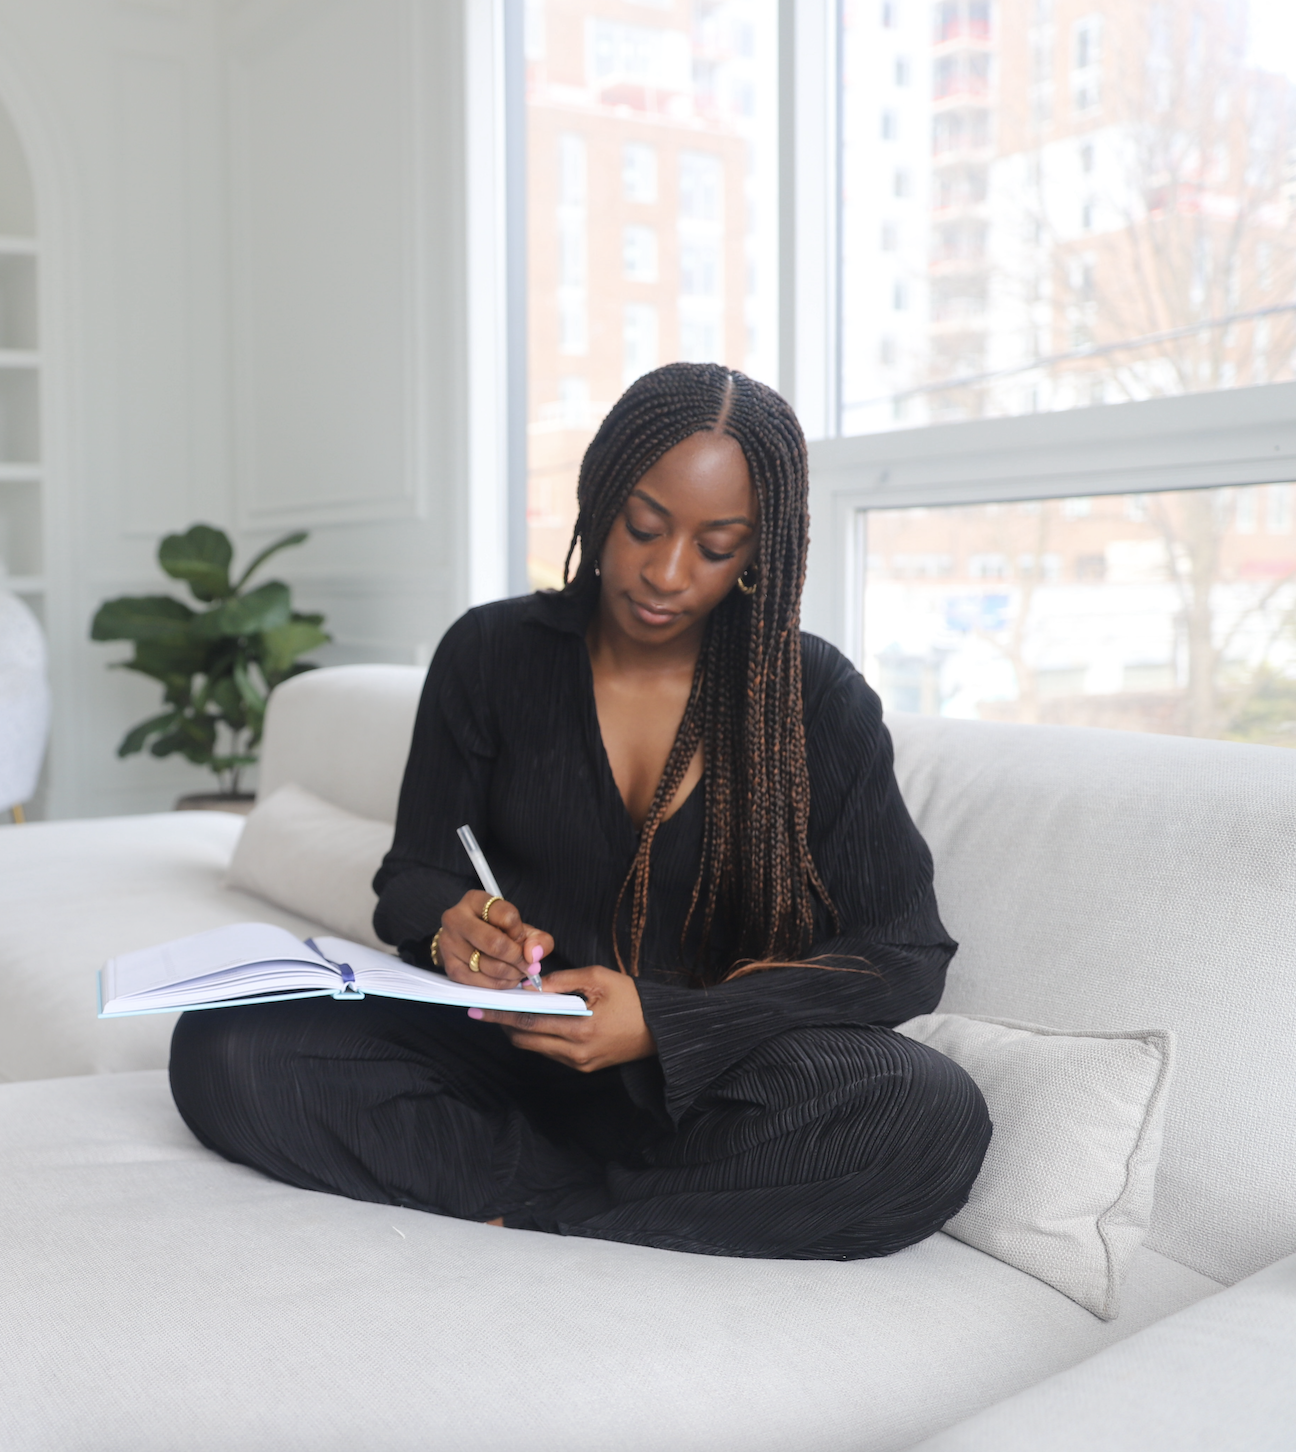 Girl sitting on a couch wearing black and writing in a journal